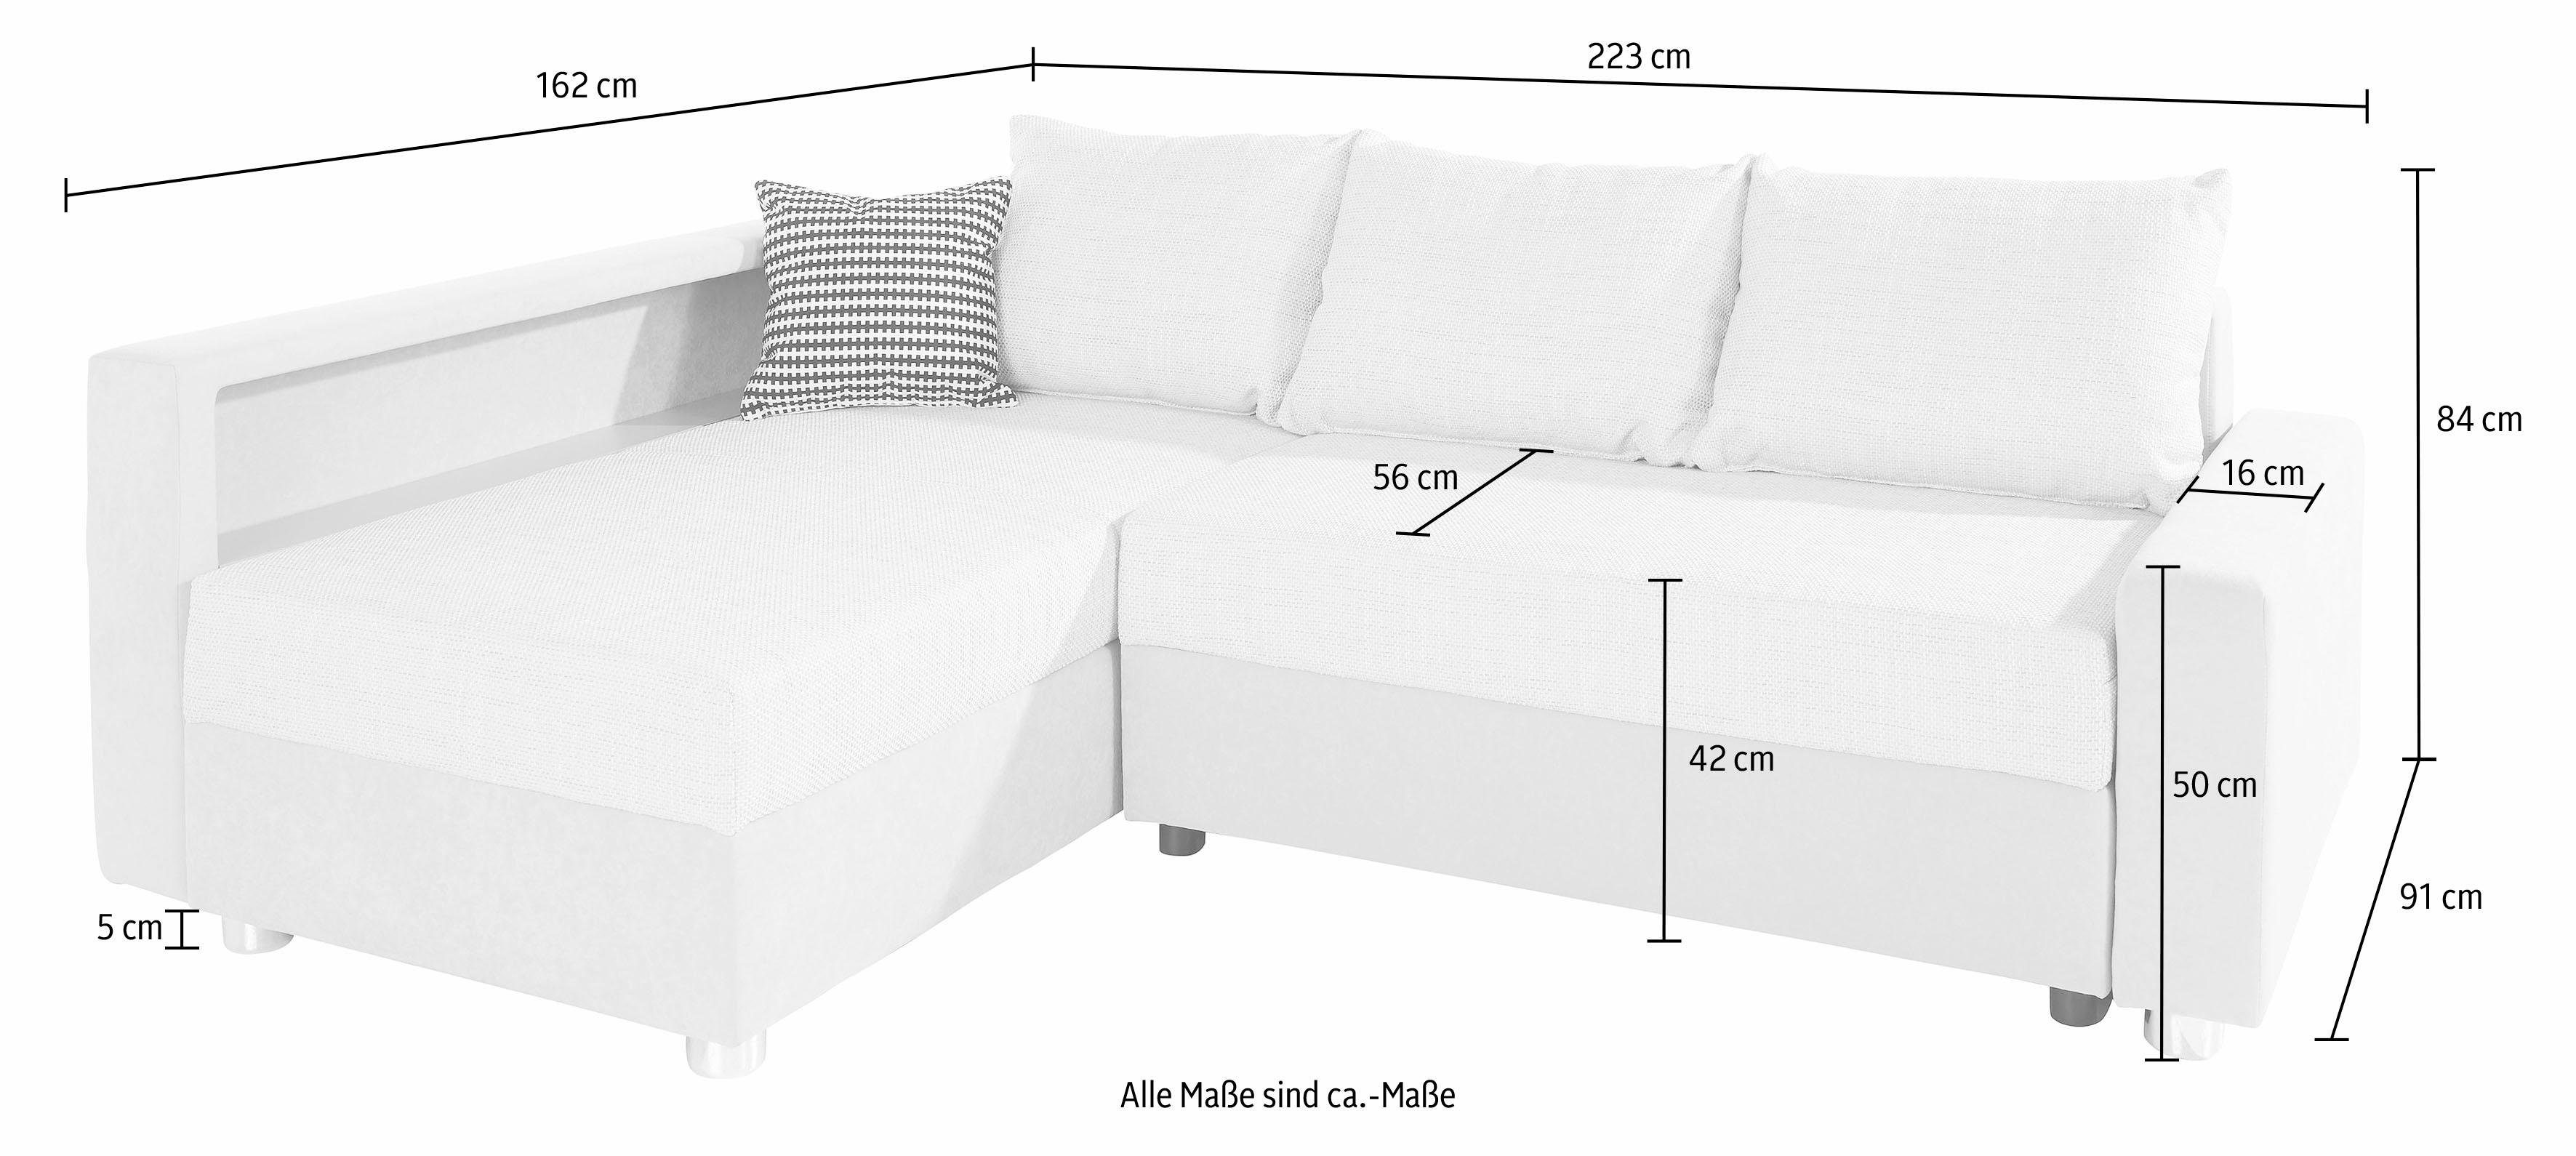 inklusive wahlweise Ecksofa COLLECTION Federkern, RGB-LED-Beleuchtung Bettfunktion, Relax, AB mit